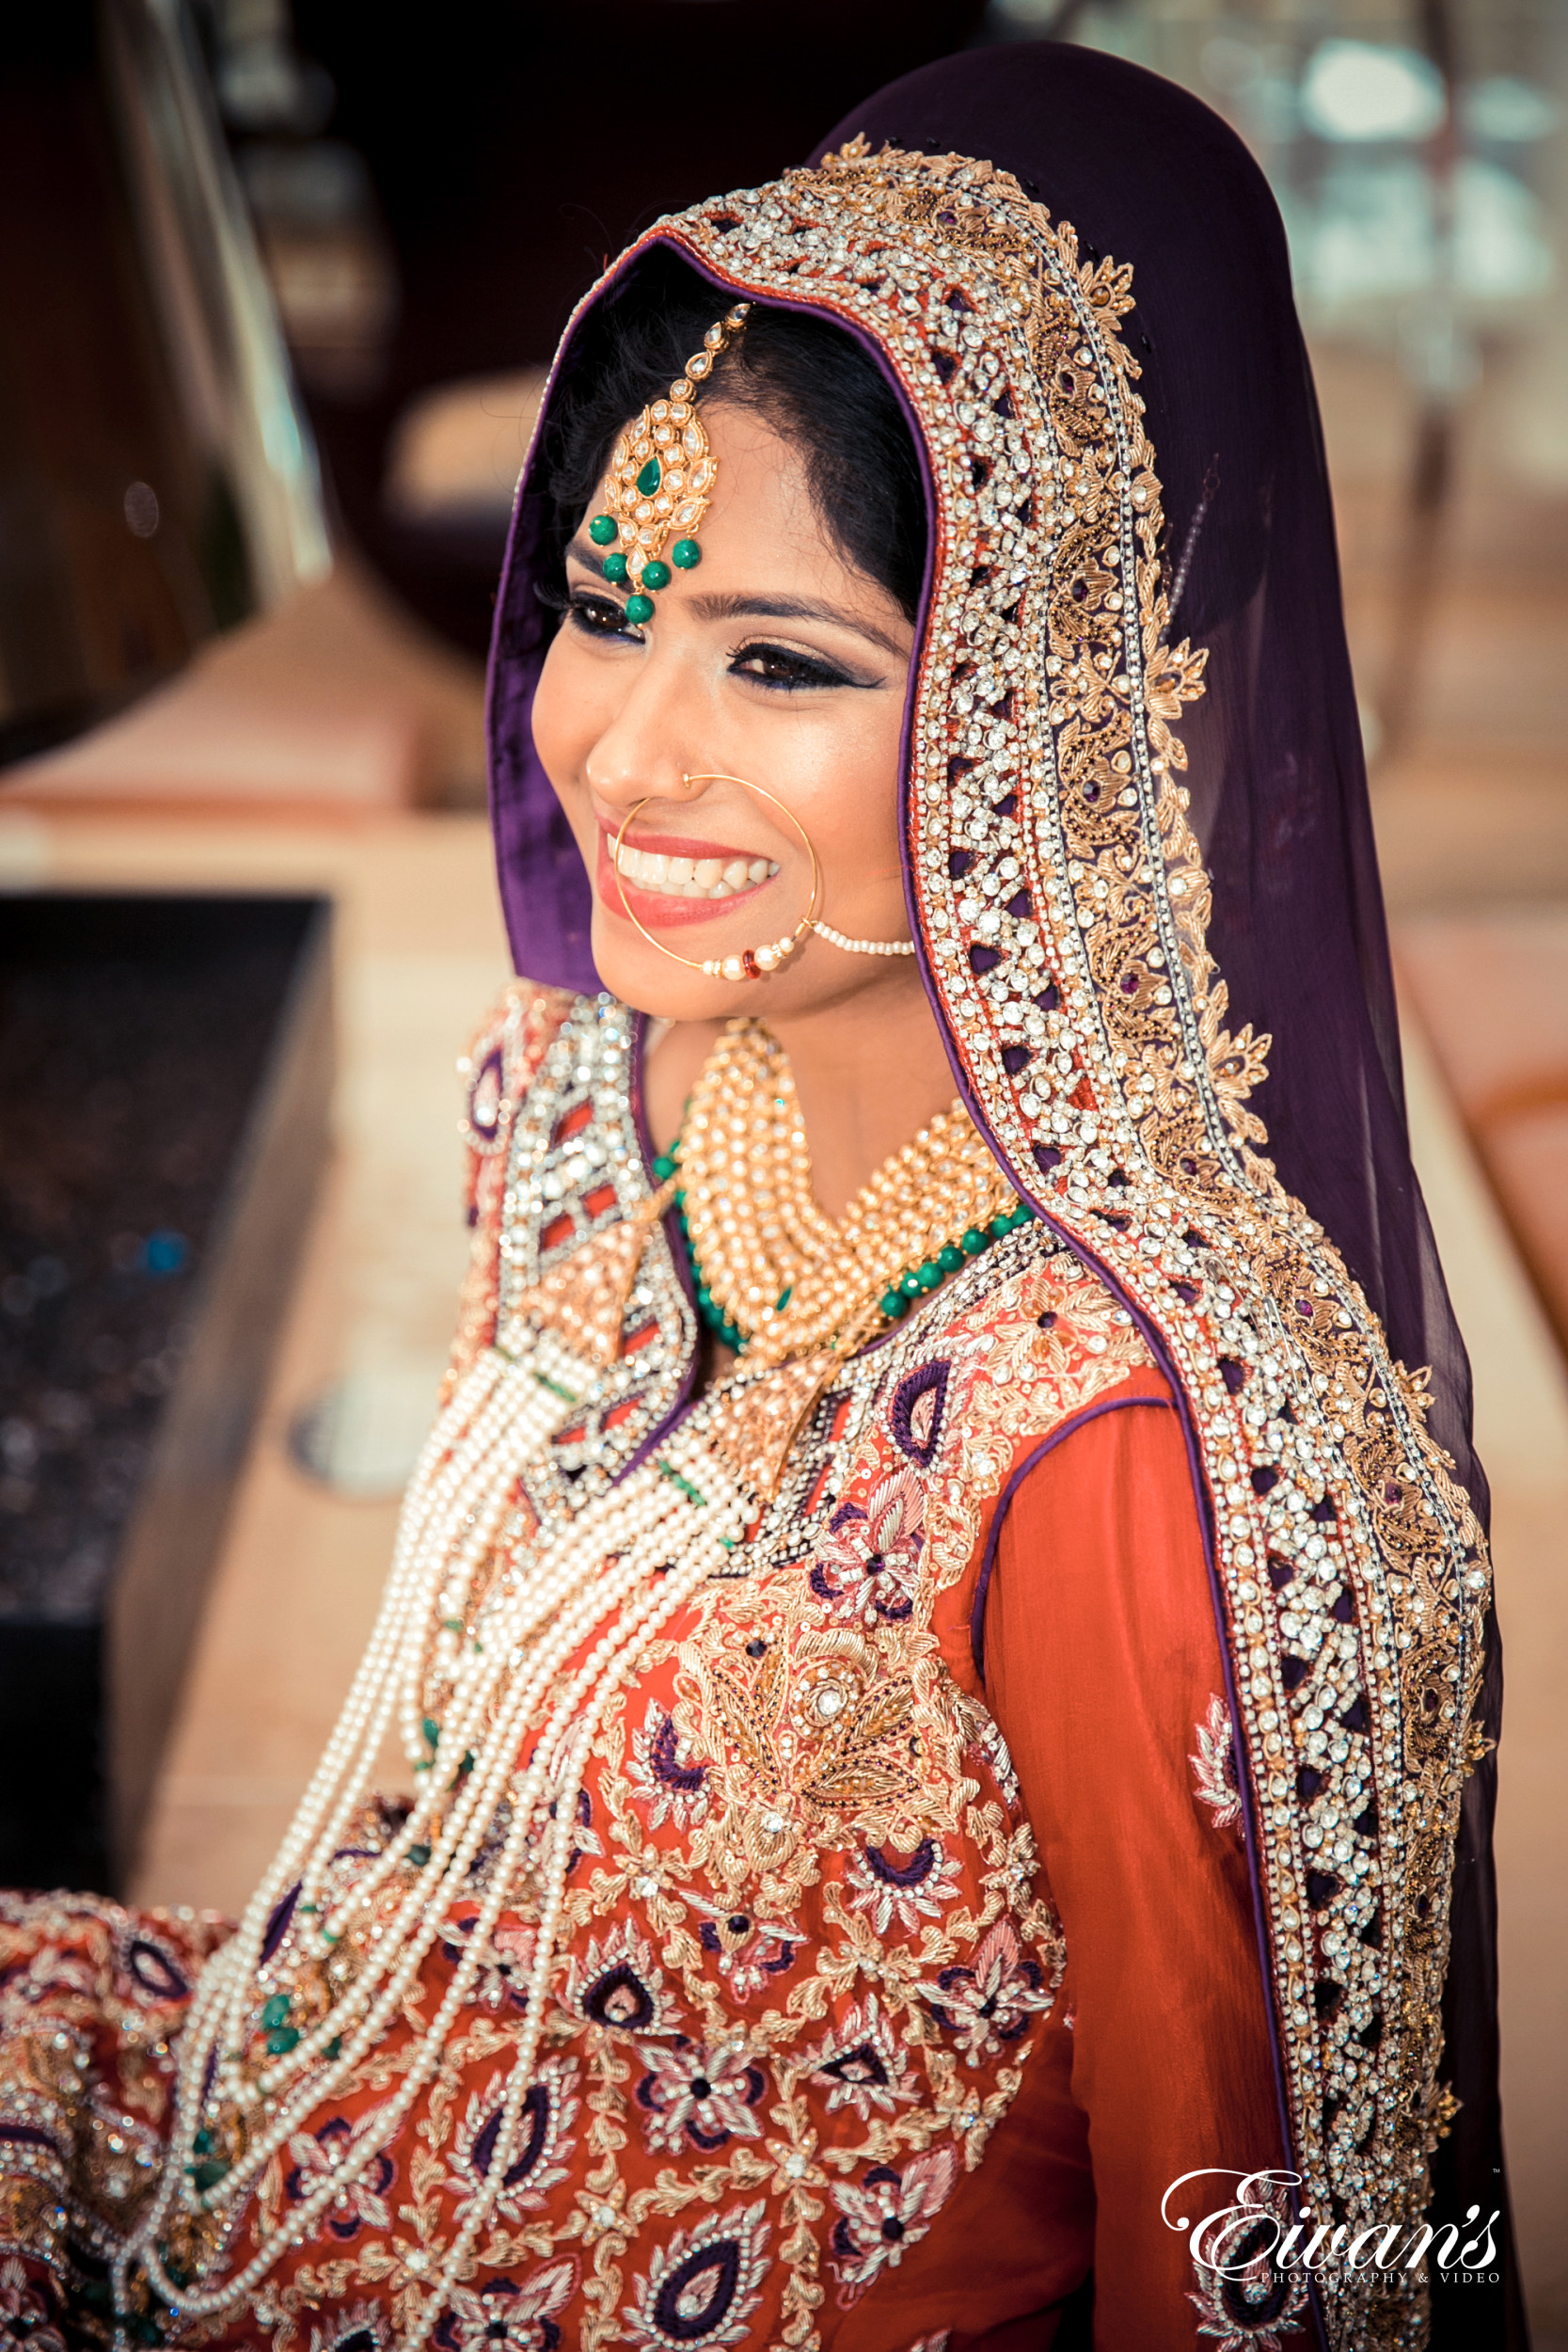 What to expect in an Indian Wedding Baraat!